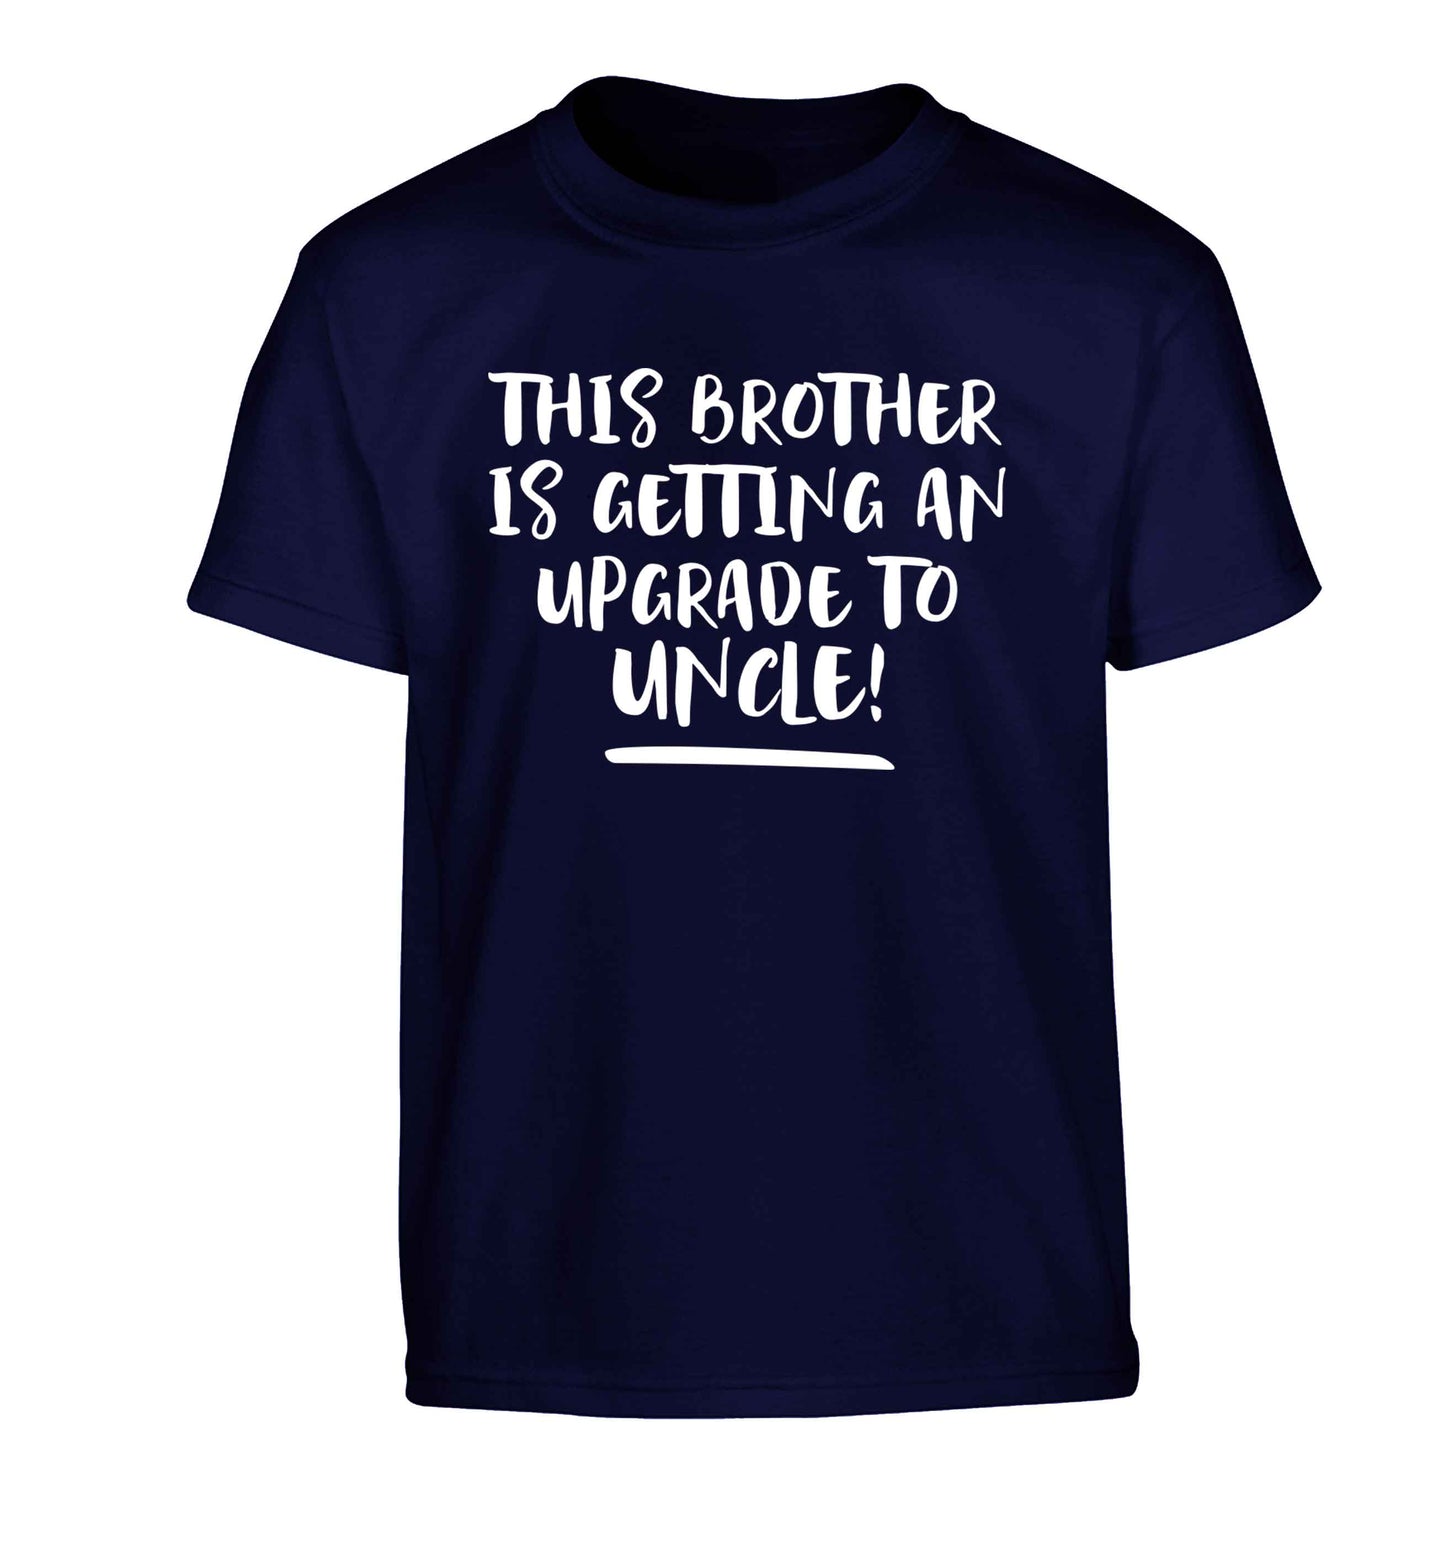 This brother is getting an upgrade to uncle! Children's navy Tshirt 12-13 Years